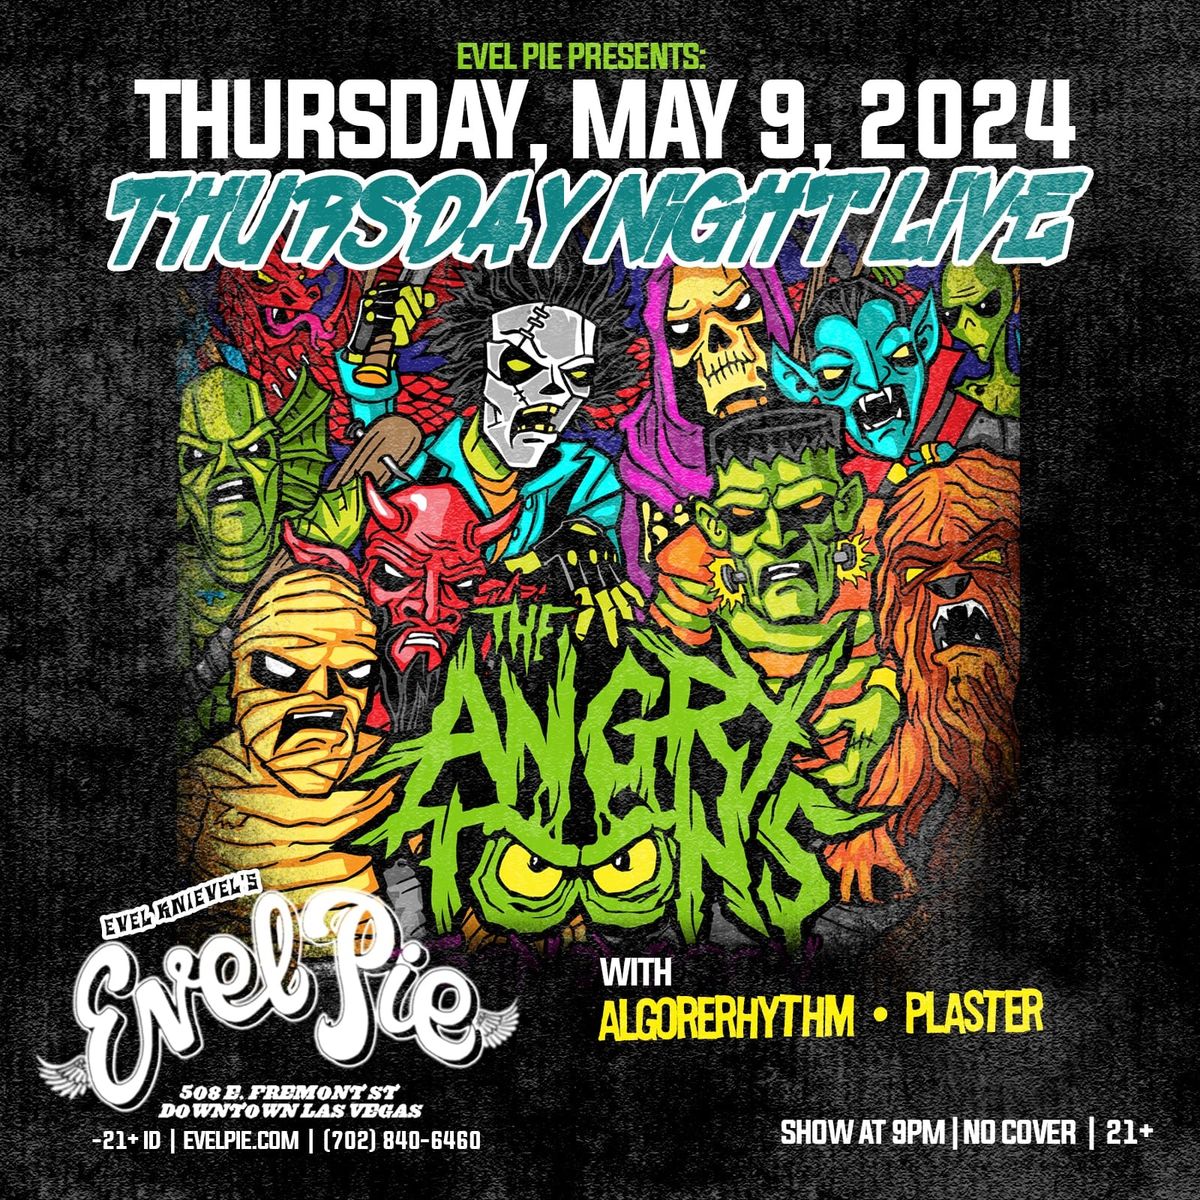 Thursday Night Live @ Evel Pie - The Angry Toons, Algorerhythm, and Plaster